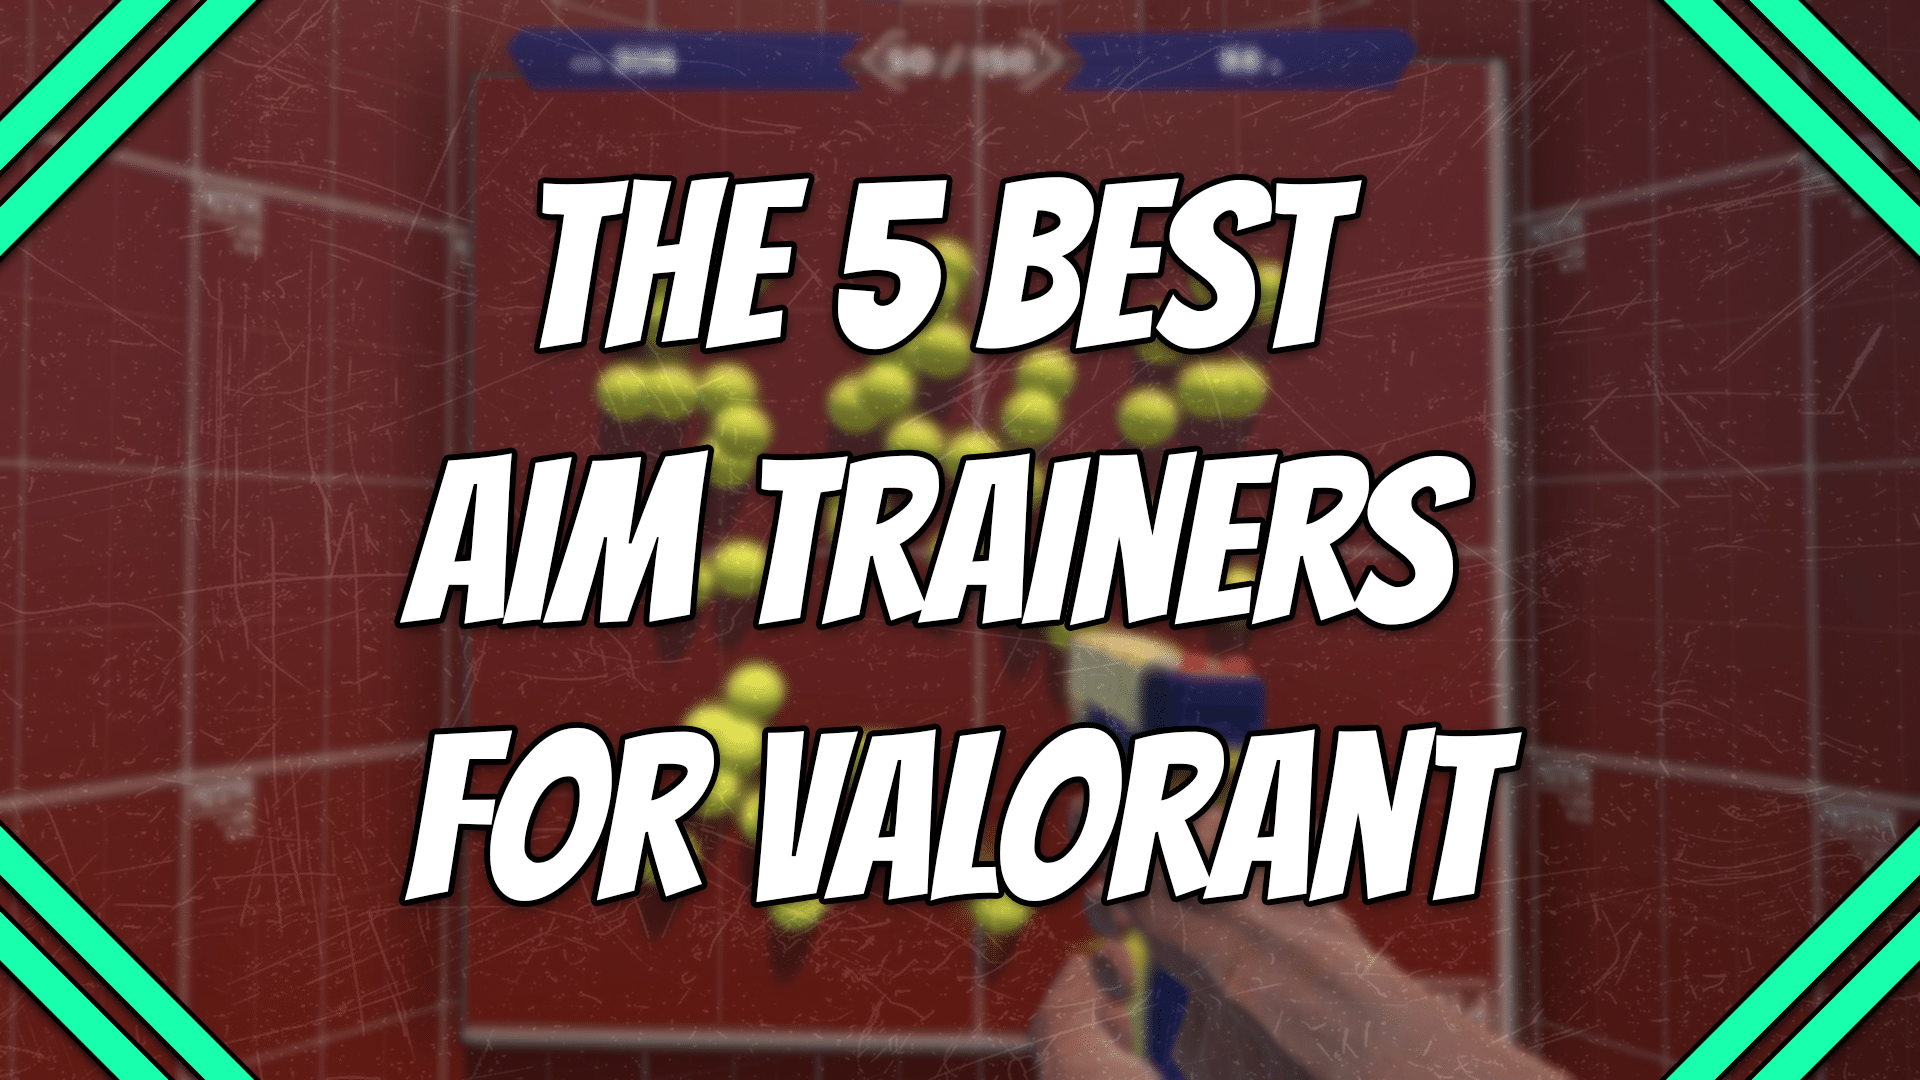 These are best Valorant aim training methods in KovaaK's 